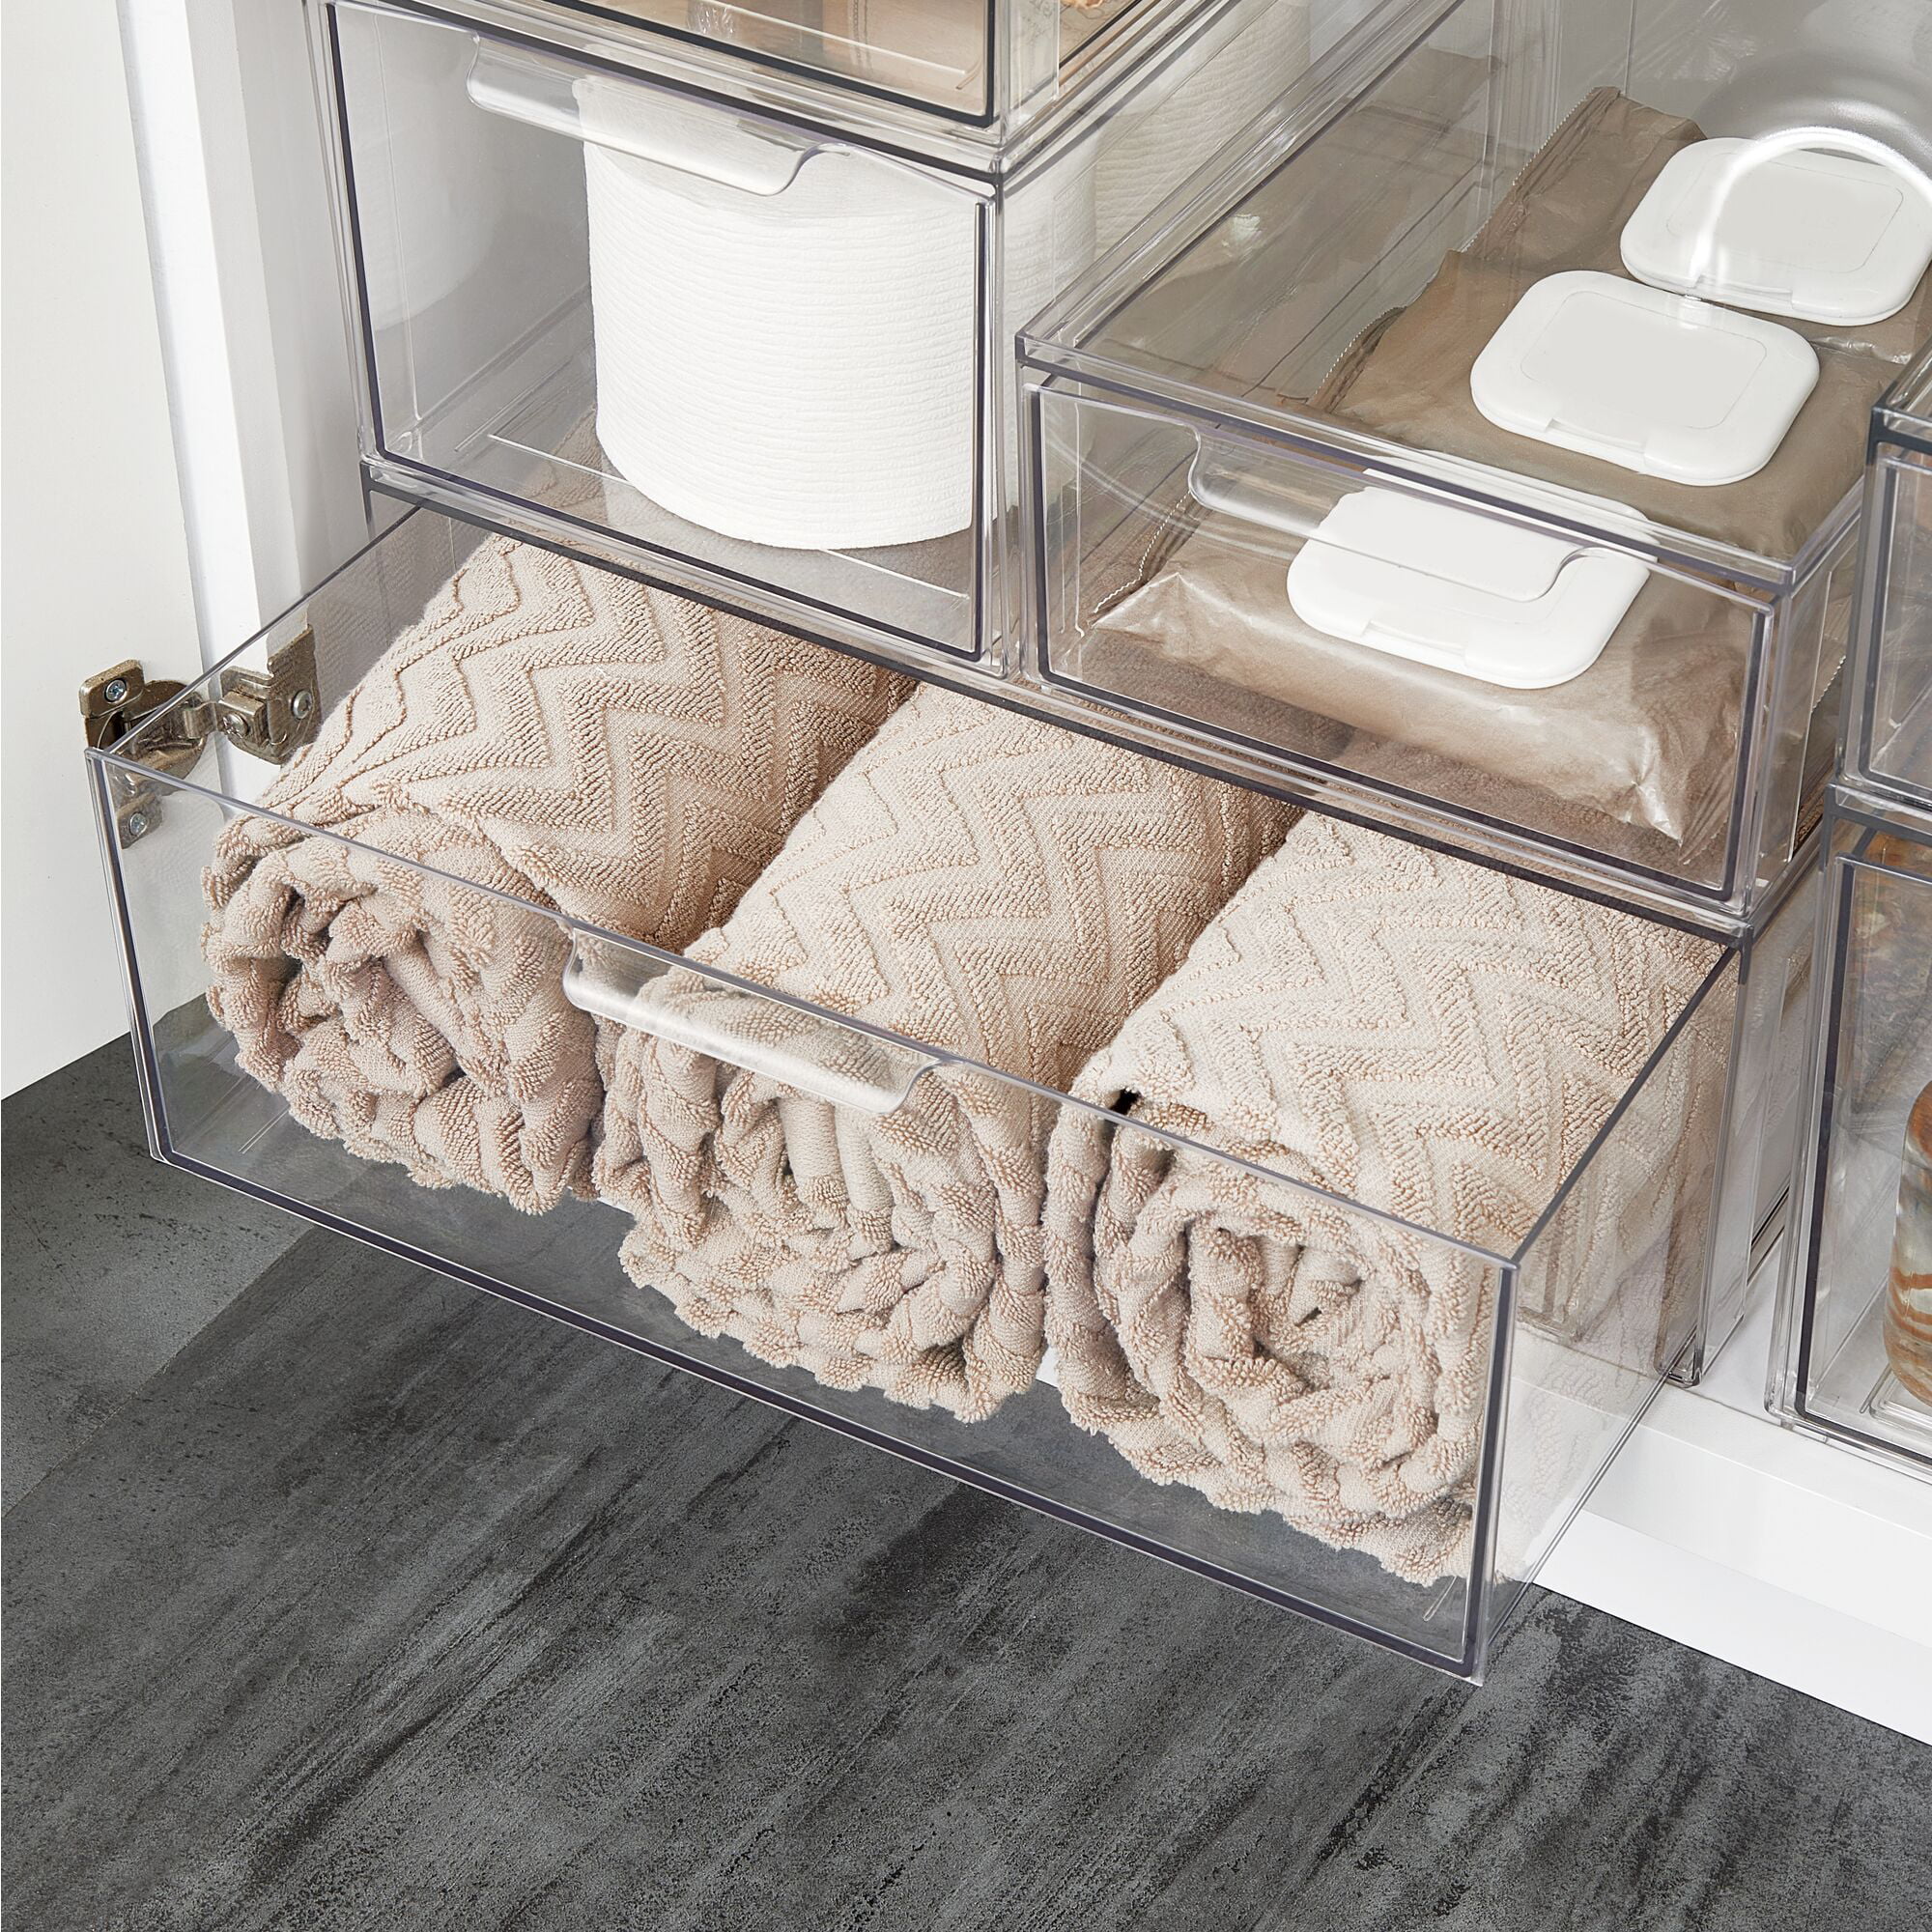 mDesign Plastic Stackable Bathroom Storage Organizer Bin Containers with Front Pull Drawer for Bathroom Countertop, Vanity, C